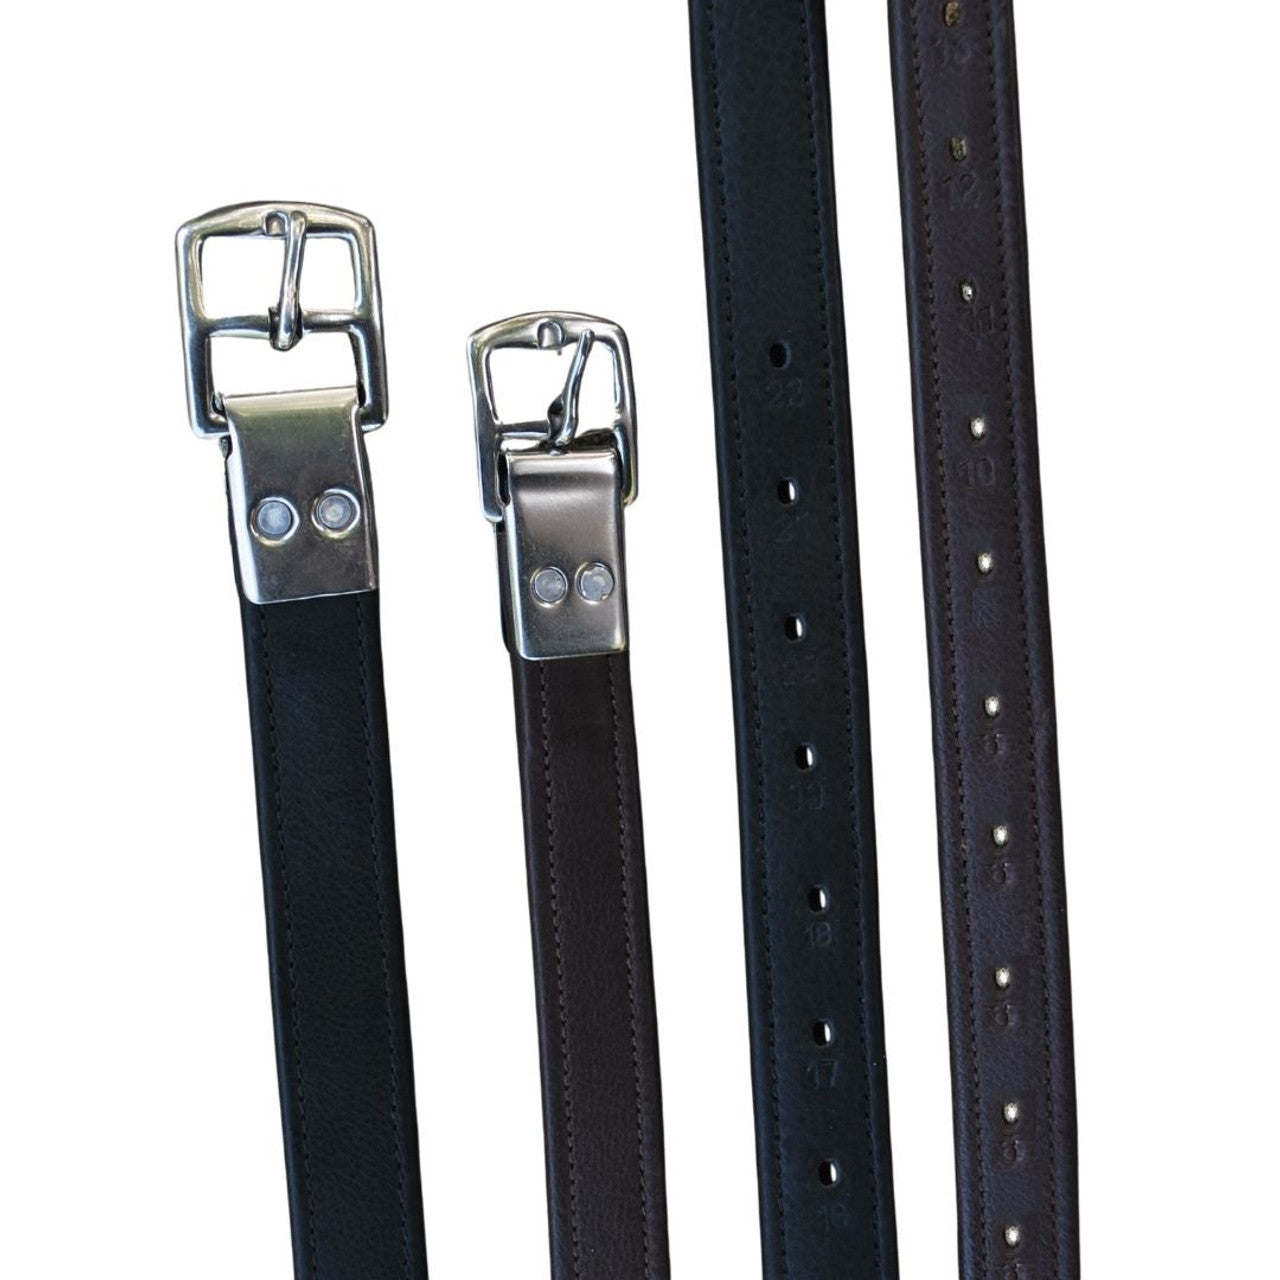 Black Oak Calf Lined Leathers with Riveted Buckle